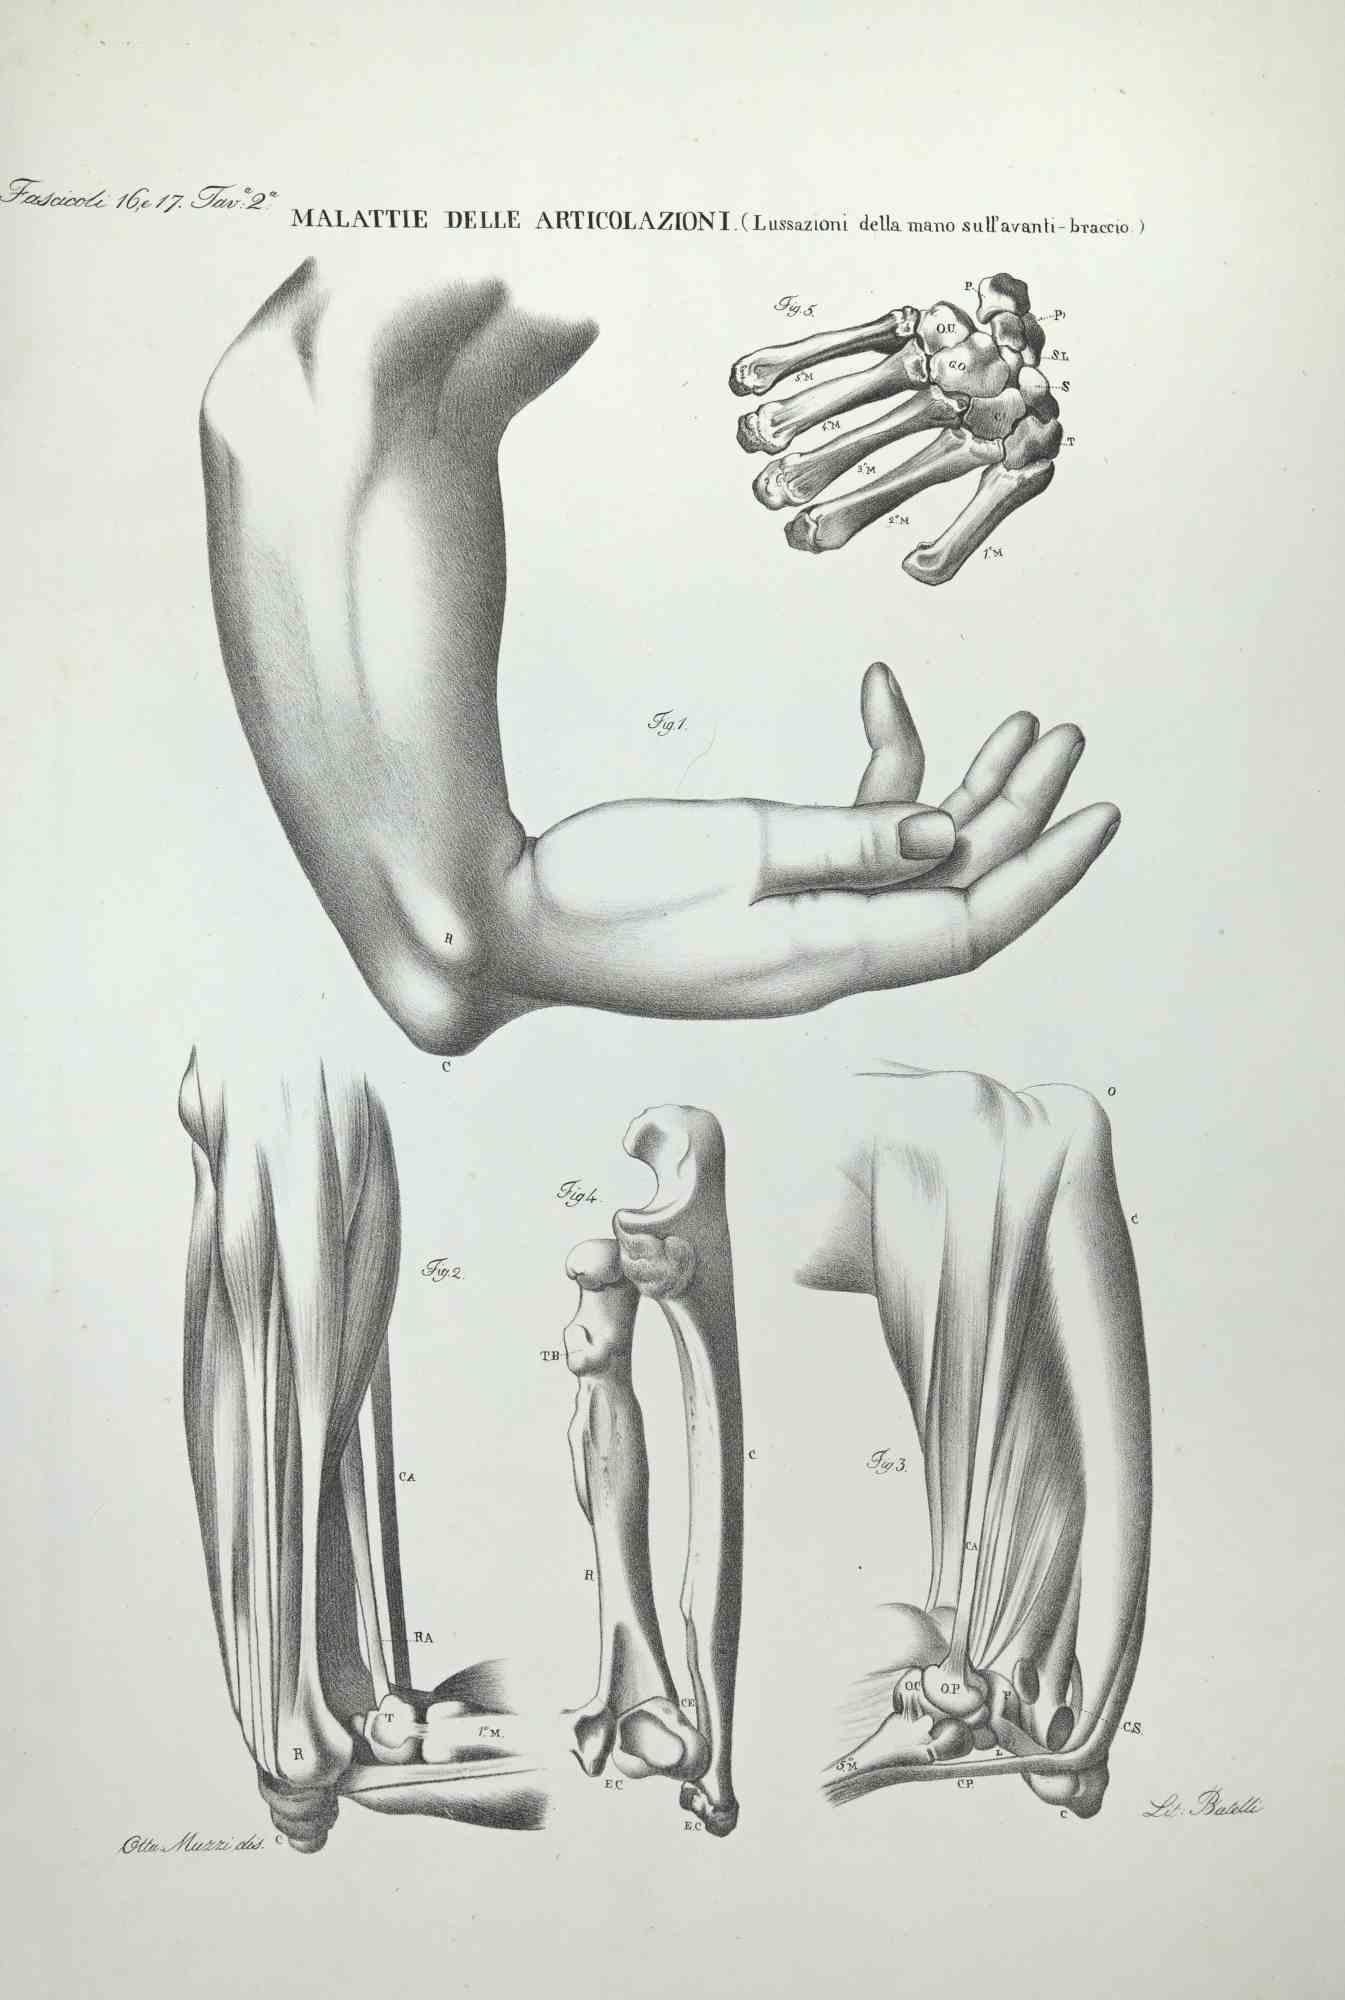 Joint Diseases is a lithograph hand colored by Ottavio Muzzi for the edition of Antoine Chazal, Human Anatomy, Printers Batelli and Ridolfi, 1843.

The work belongs to the Atlante generale della anatomia patologica del corpo umano by Jean